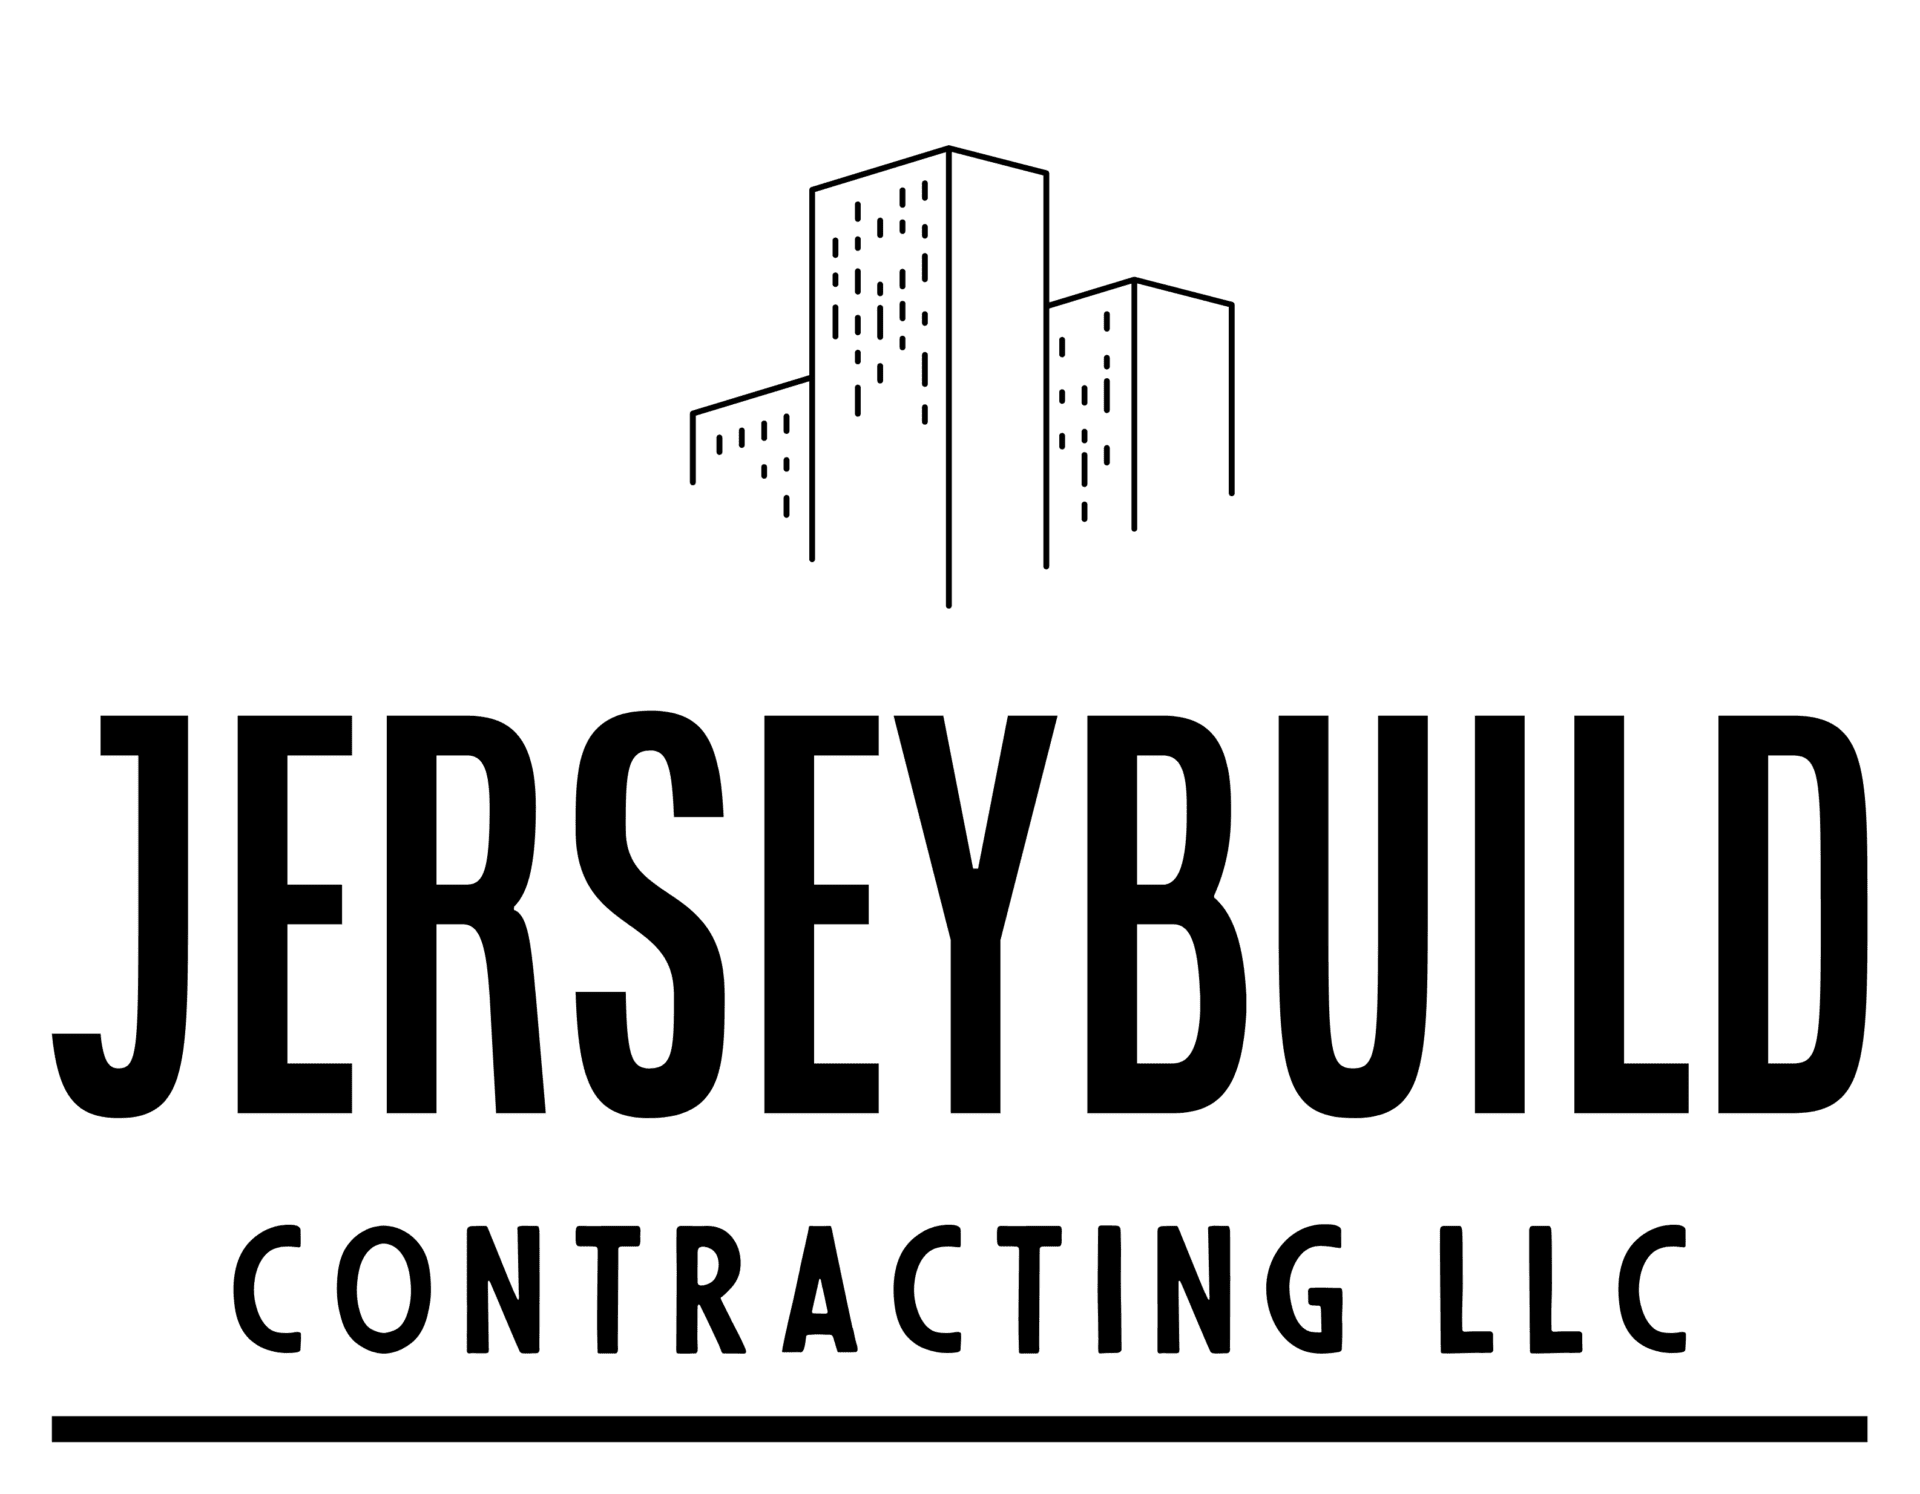 Jersey Build Contracting